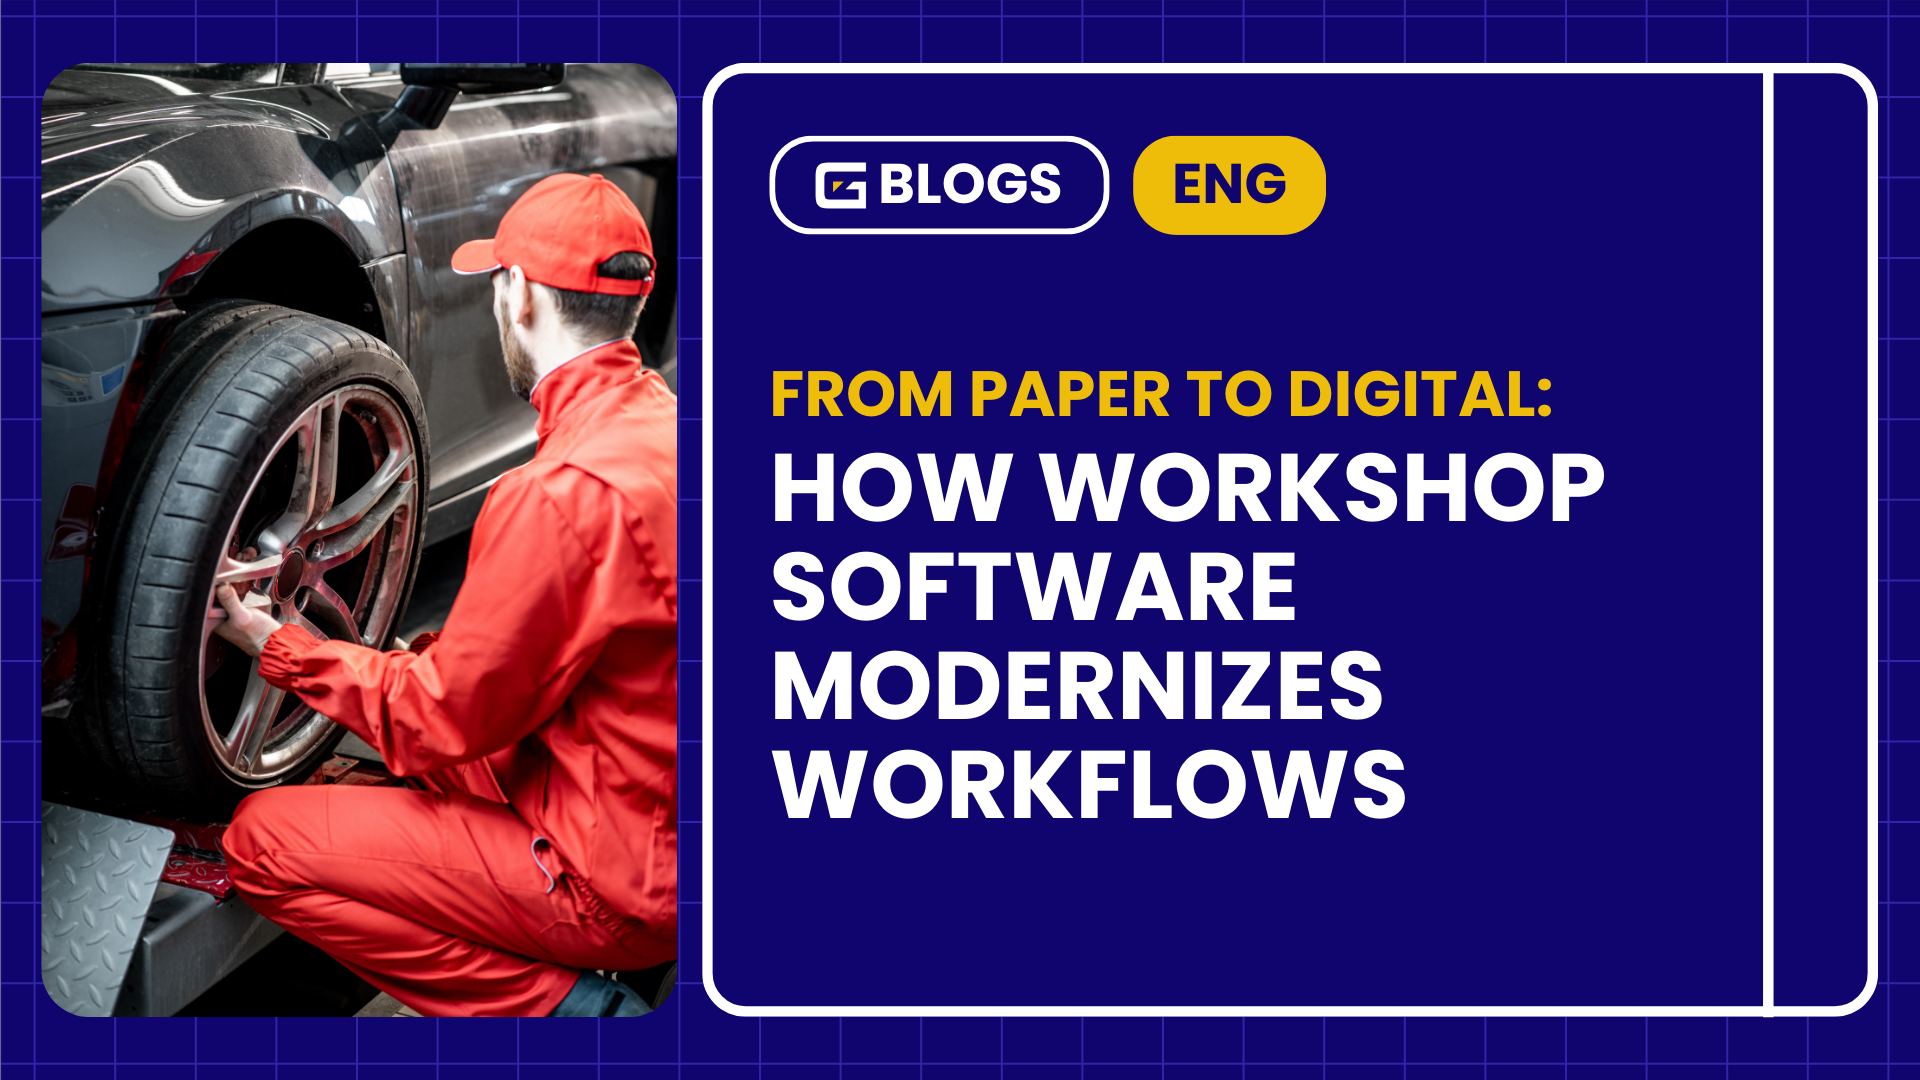 From Paper to Digital: How Workshop Software Modernizes Workflows